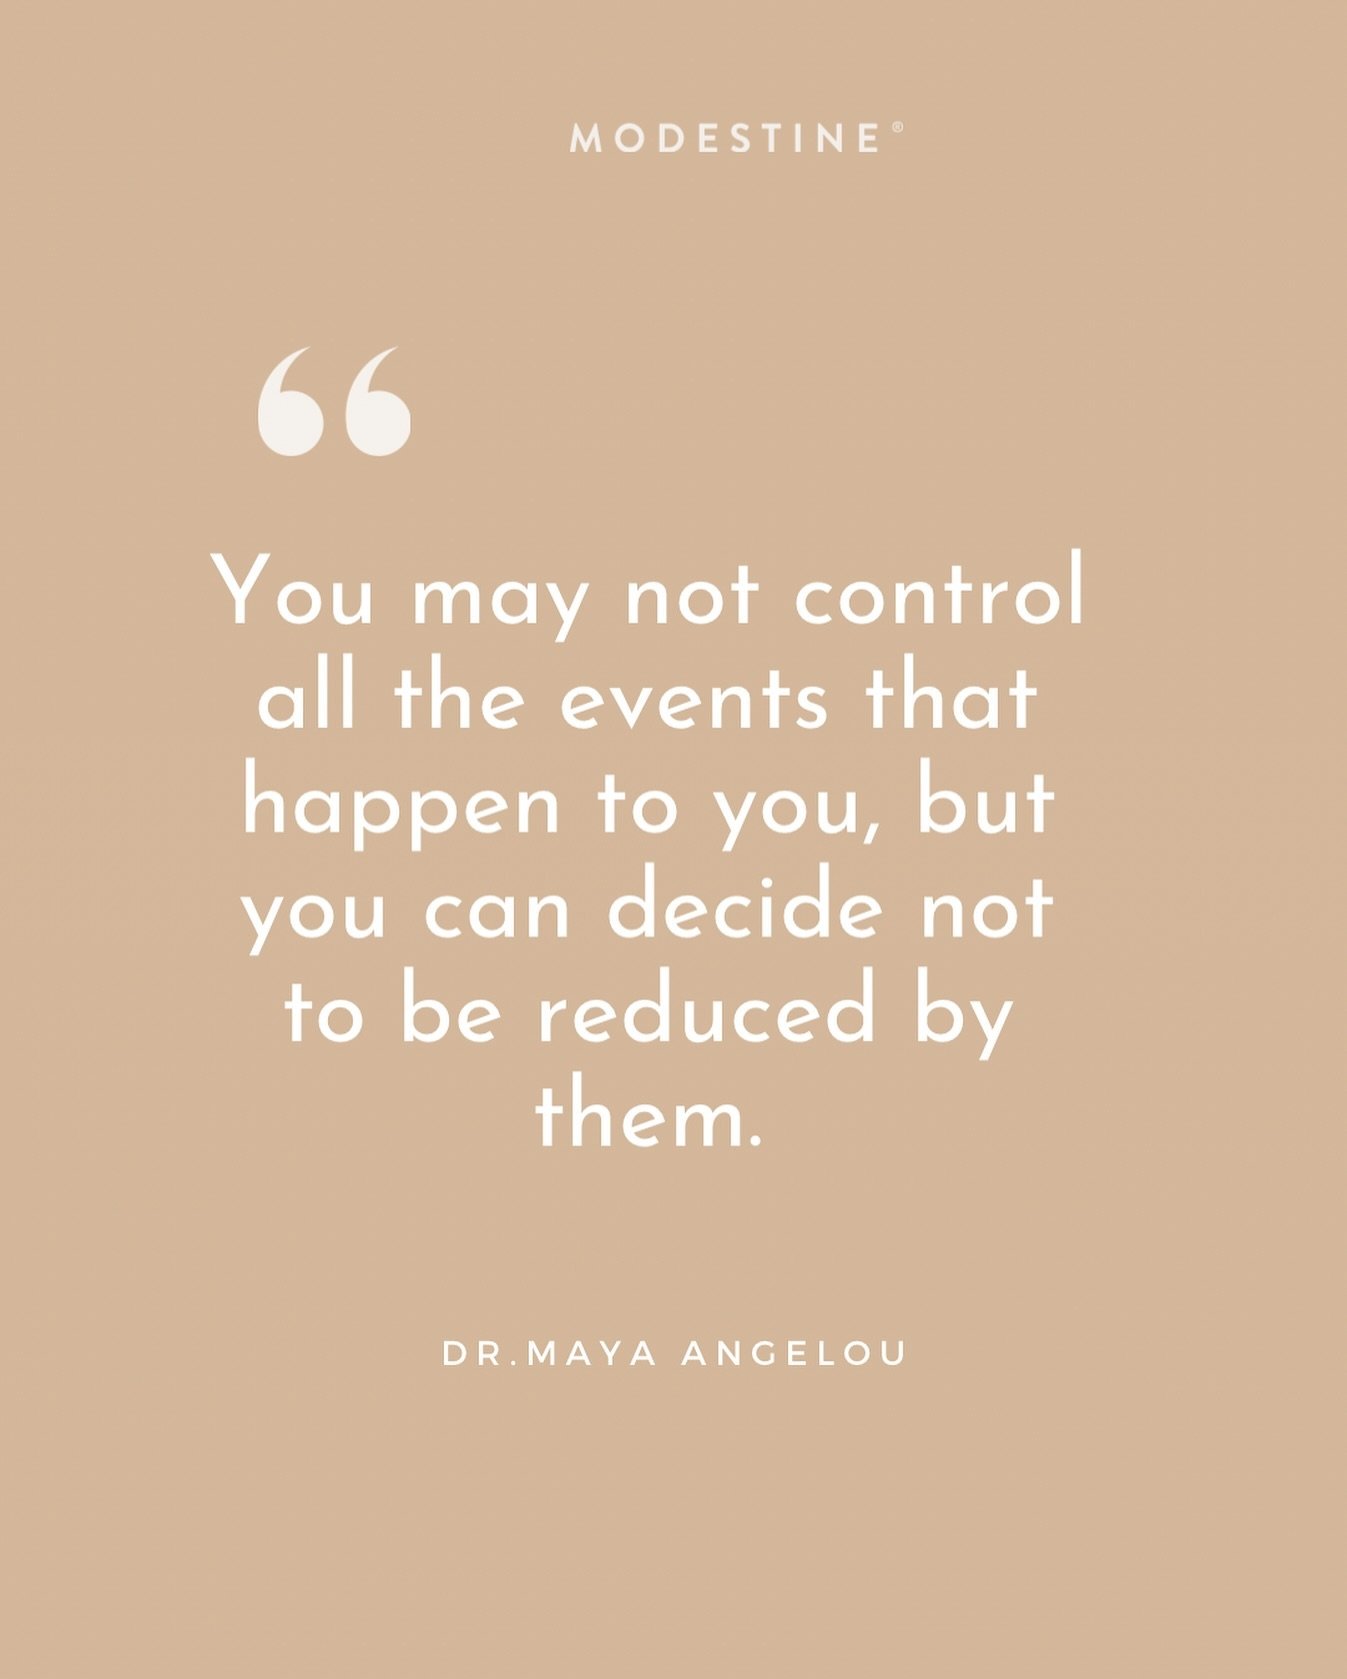 Who else feels like they need this reminder?  With midlife changes occurring at its own pace, everyday, I have to remind myself of this very sentiment. 

Felt compelled to share this powerful quote by the OG, Dr. Maya Angelou.  Let&rsquo;s lean into 